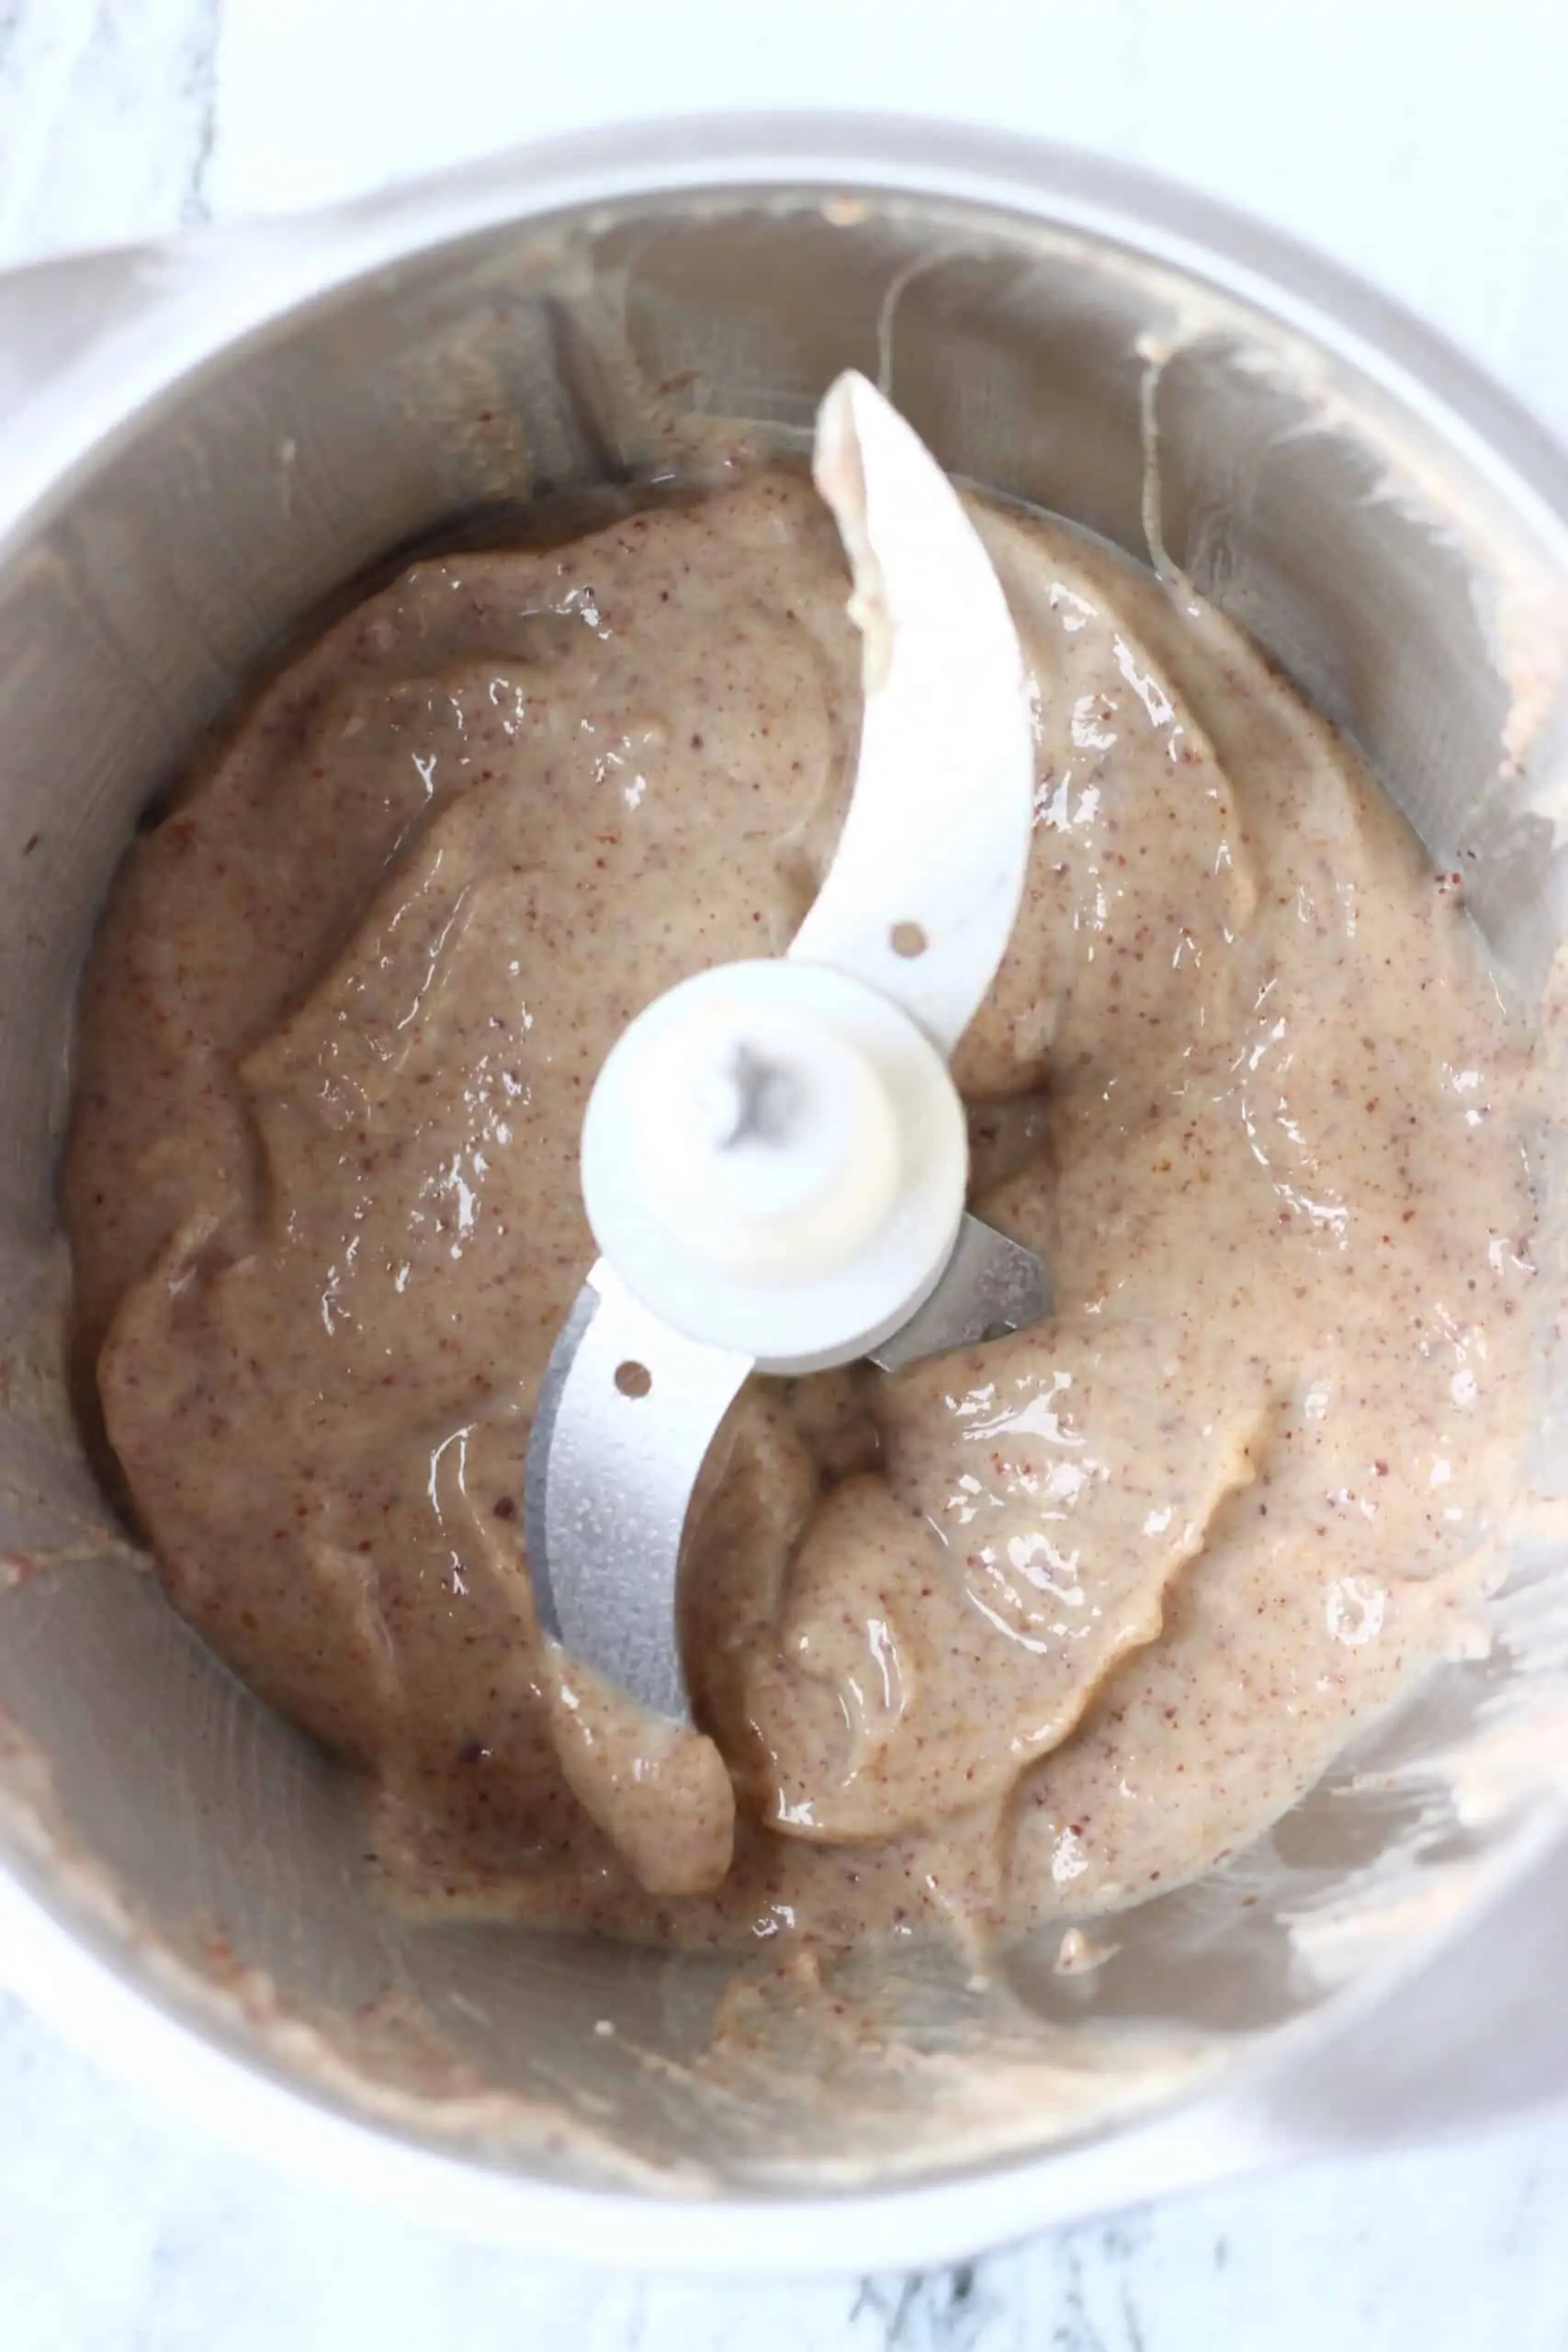 Blended dates and tofu in a food processor